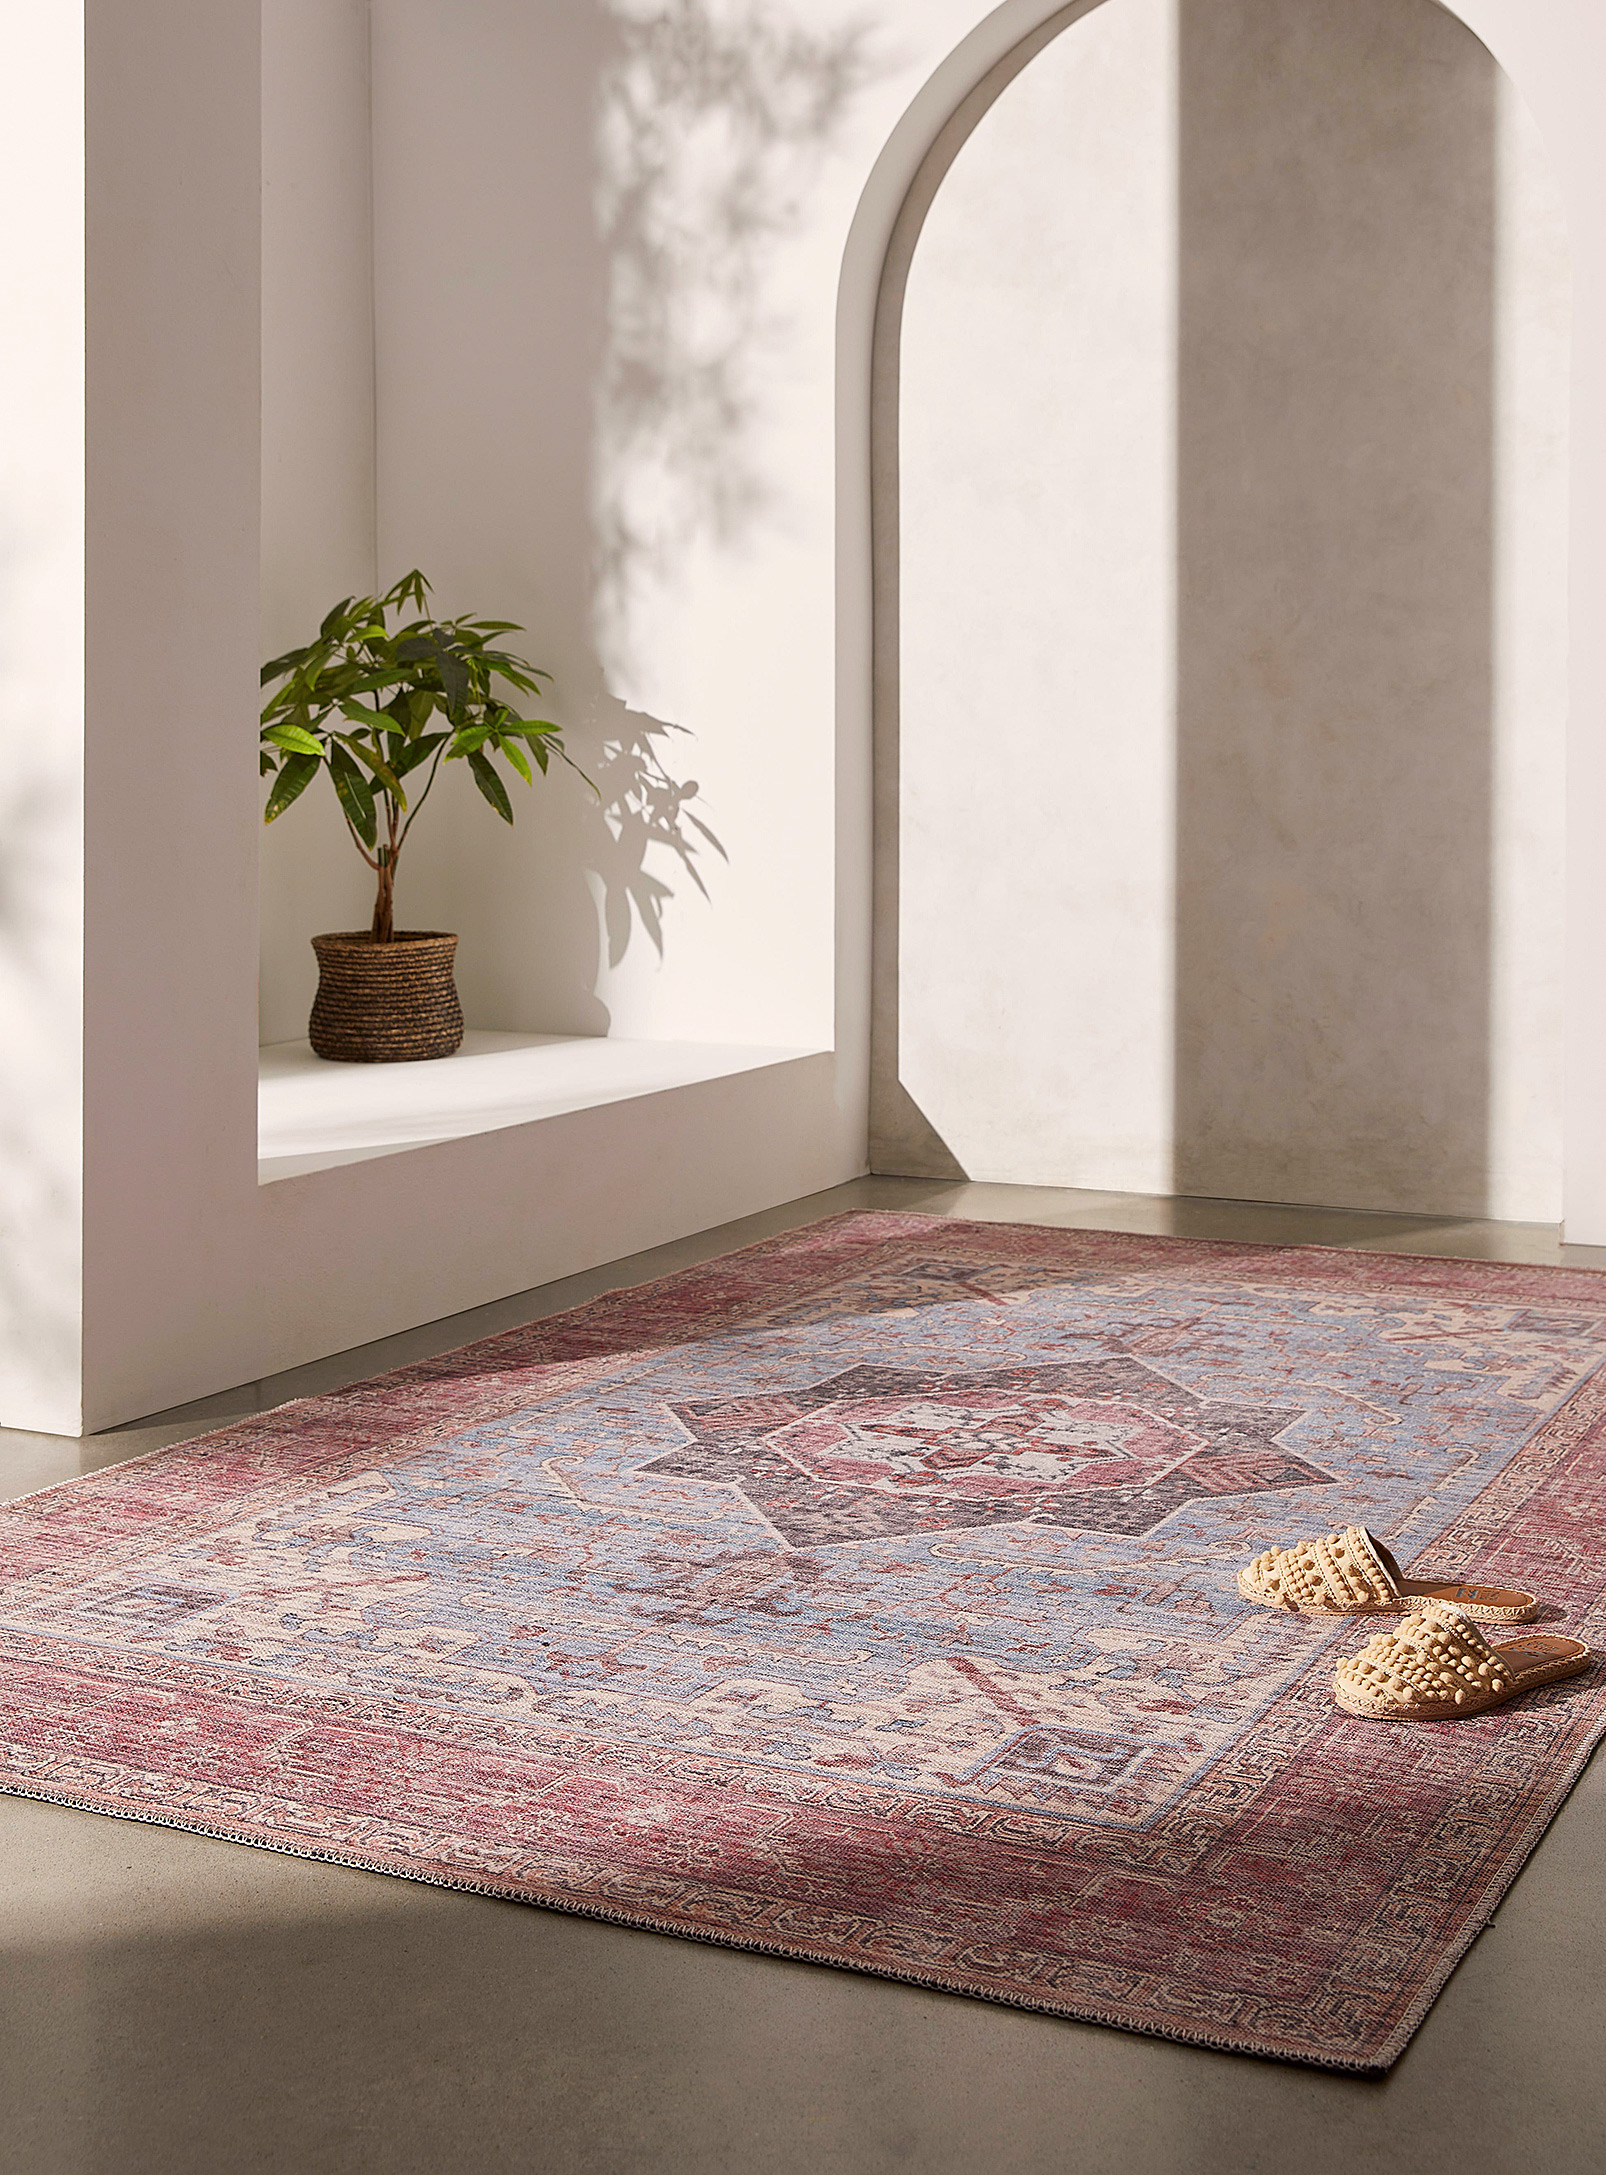 Simons Maison Ancient Heritage Rug See Available Sizes In Patterned Blue